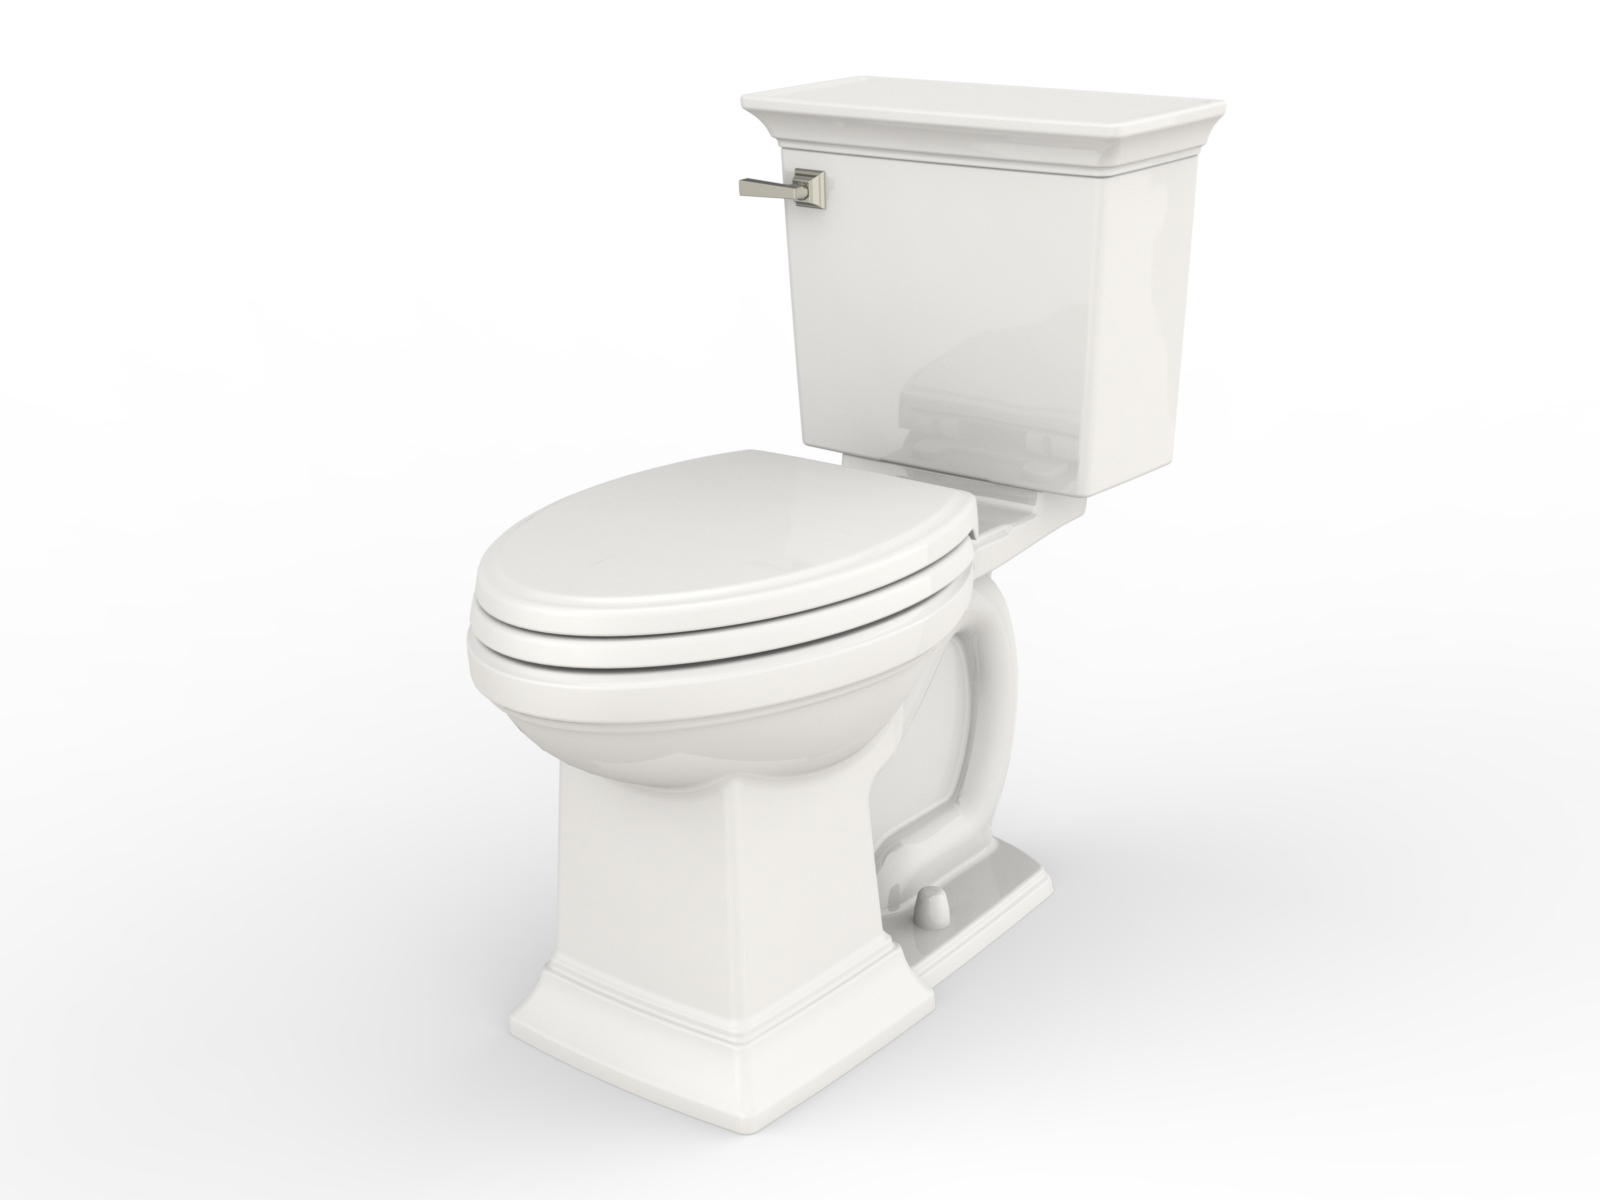 Town Square® S Two-Piece 1.28 gpf/4.8 Lpf Chair Height Elongated Toilet Less Seat